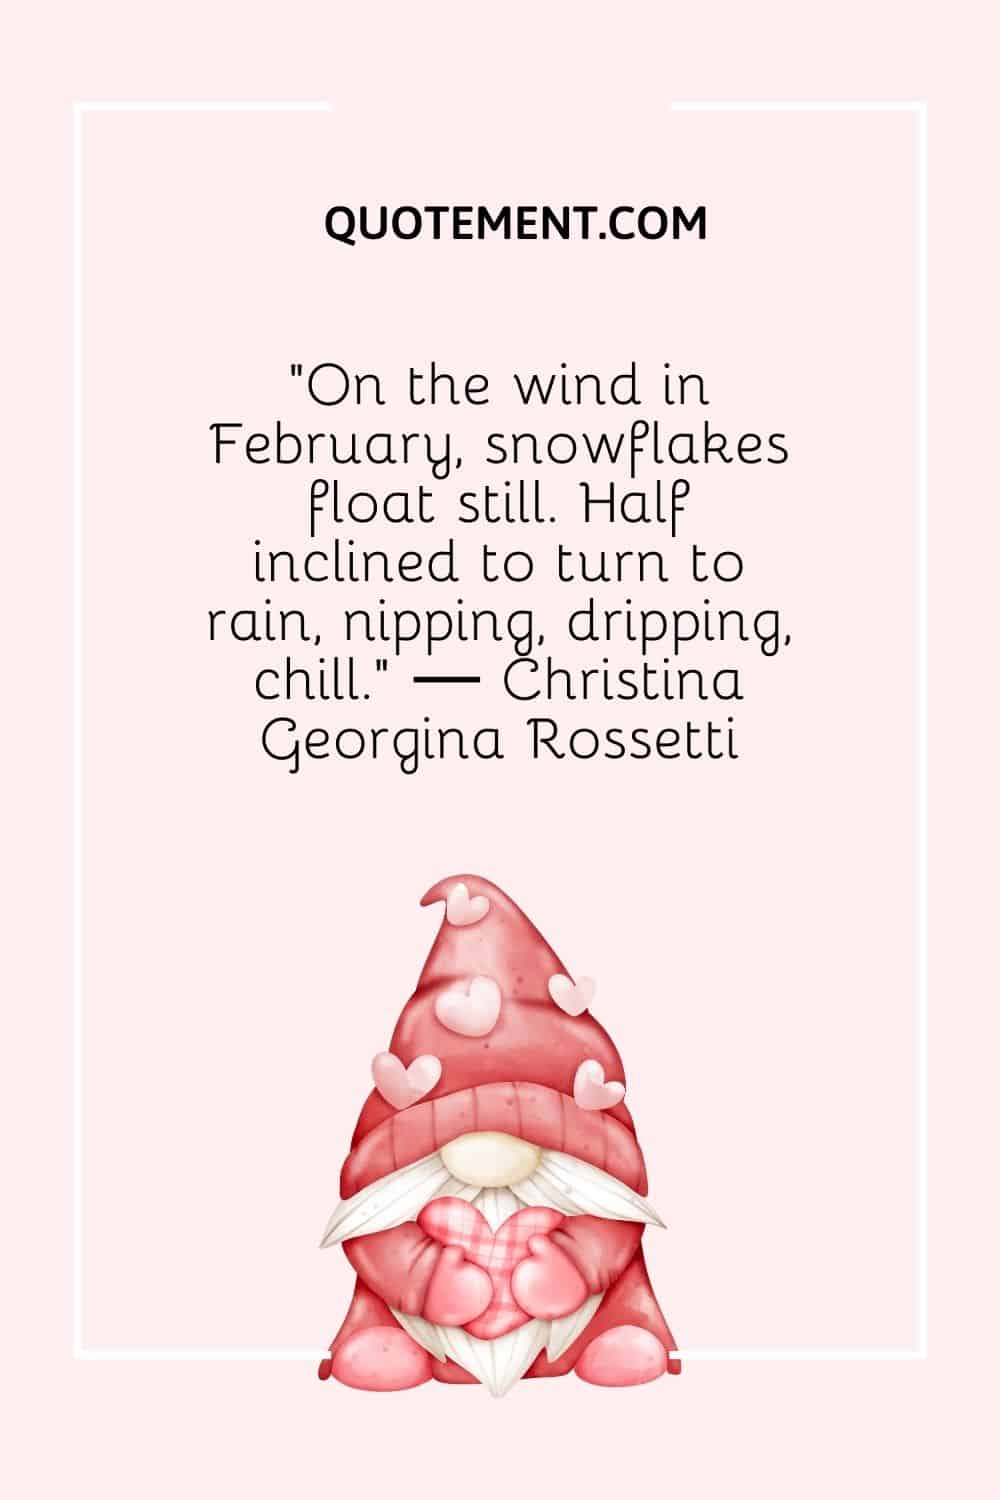 “On the wind in February, snowflakes float still. Half inclined to turn to rain, nipping, dripping, chill.” ― Christina Georgina Rossetti